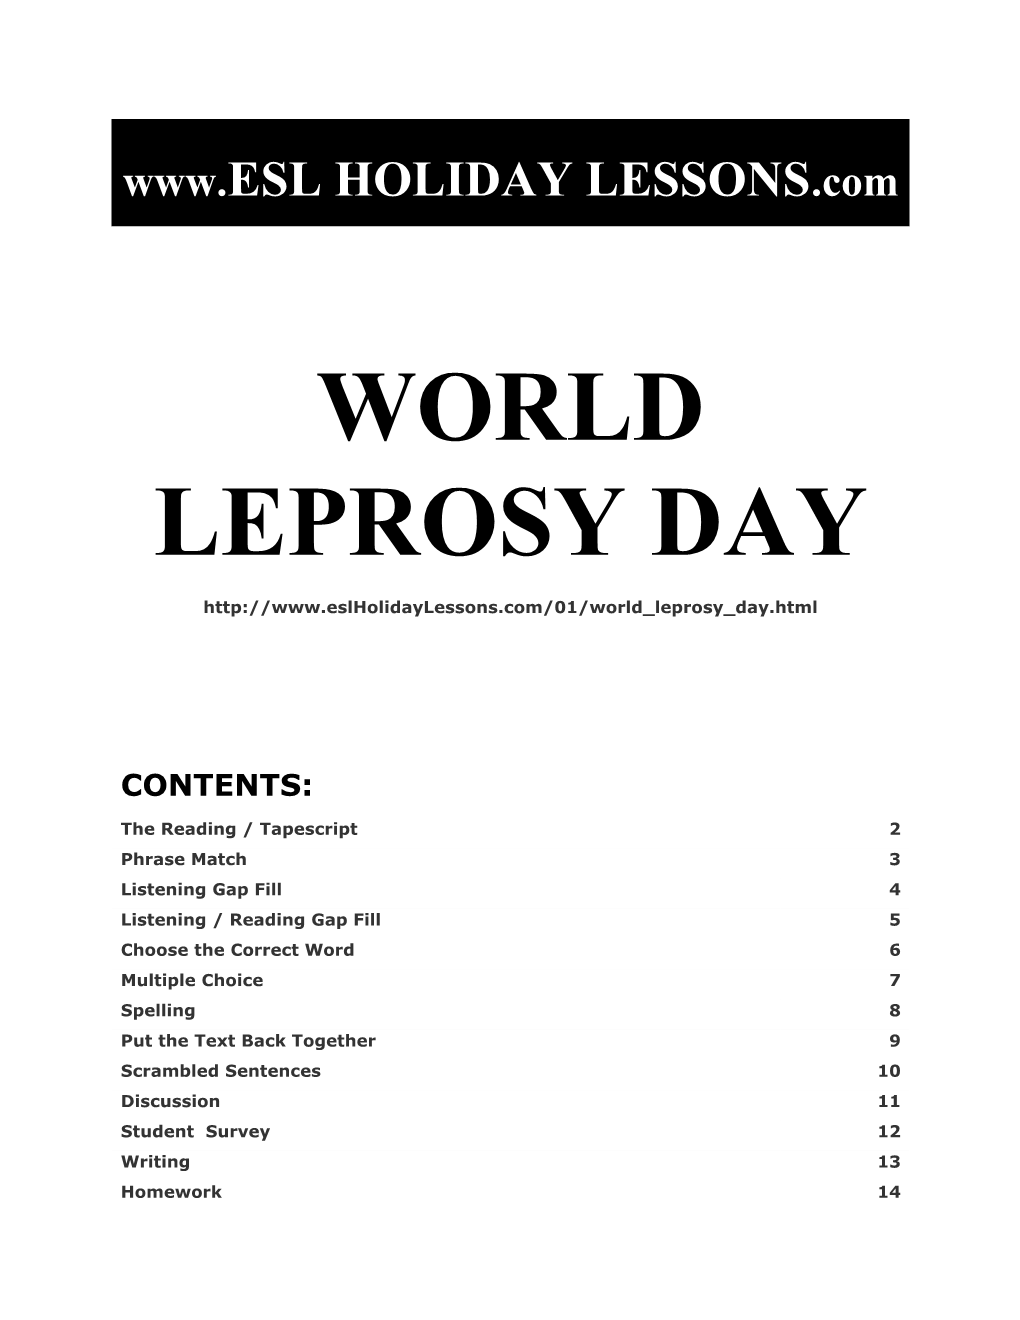 Holiday Lessons - World Leprosy Day